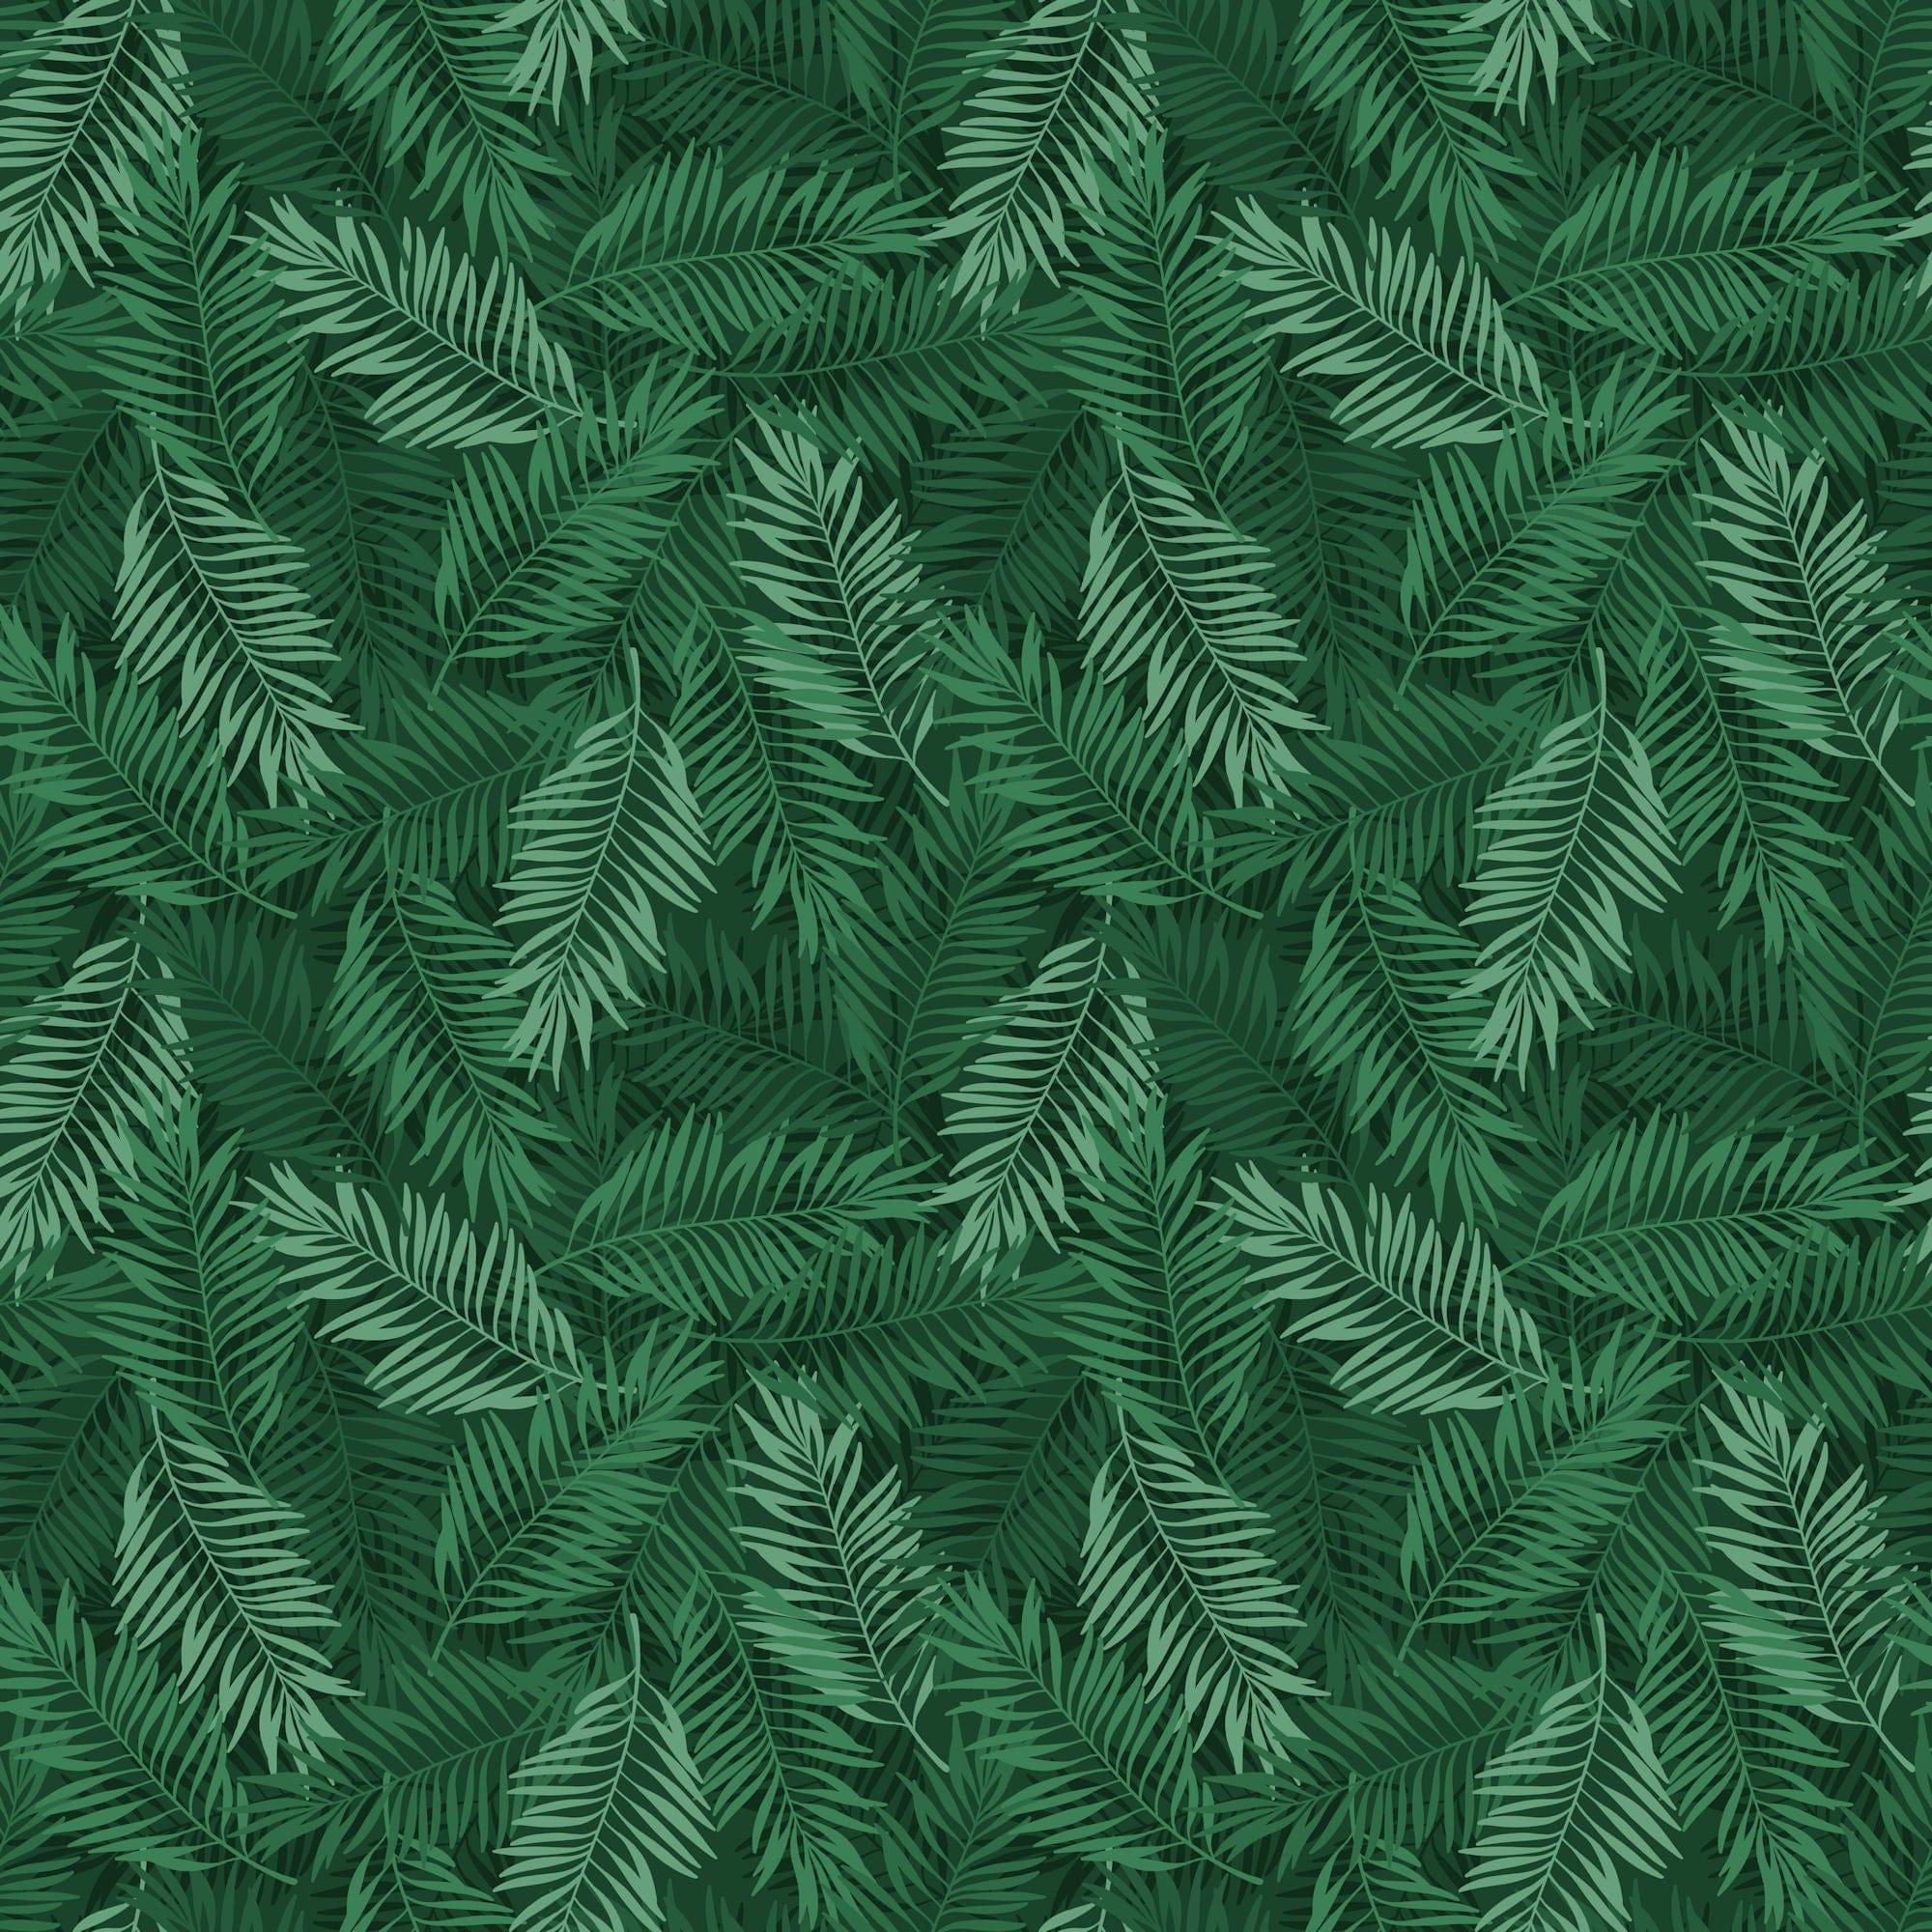 Sunkissed Collection Ferns 12 x 12 Double-Sided Scrapbook Paper by SSC Designs - Scrapbook Supply Companies